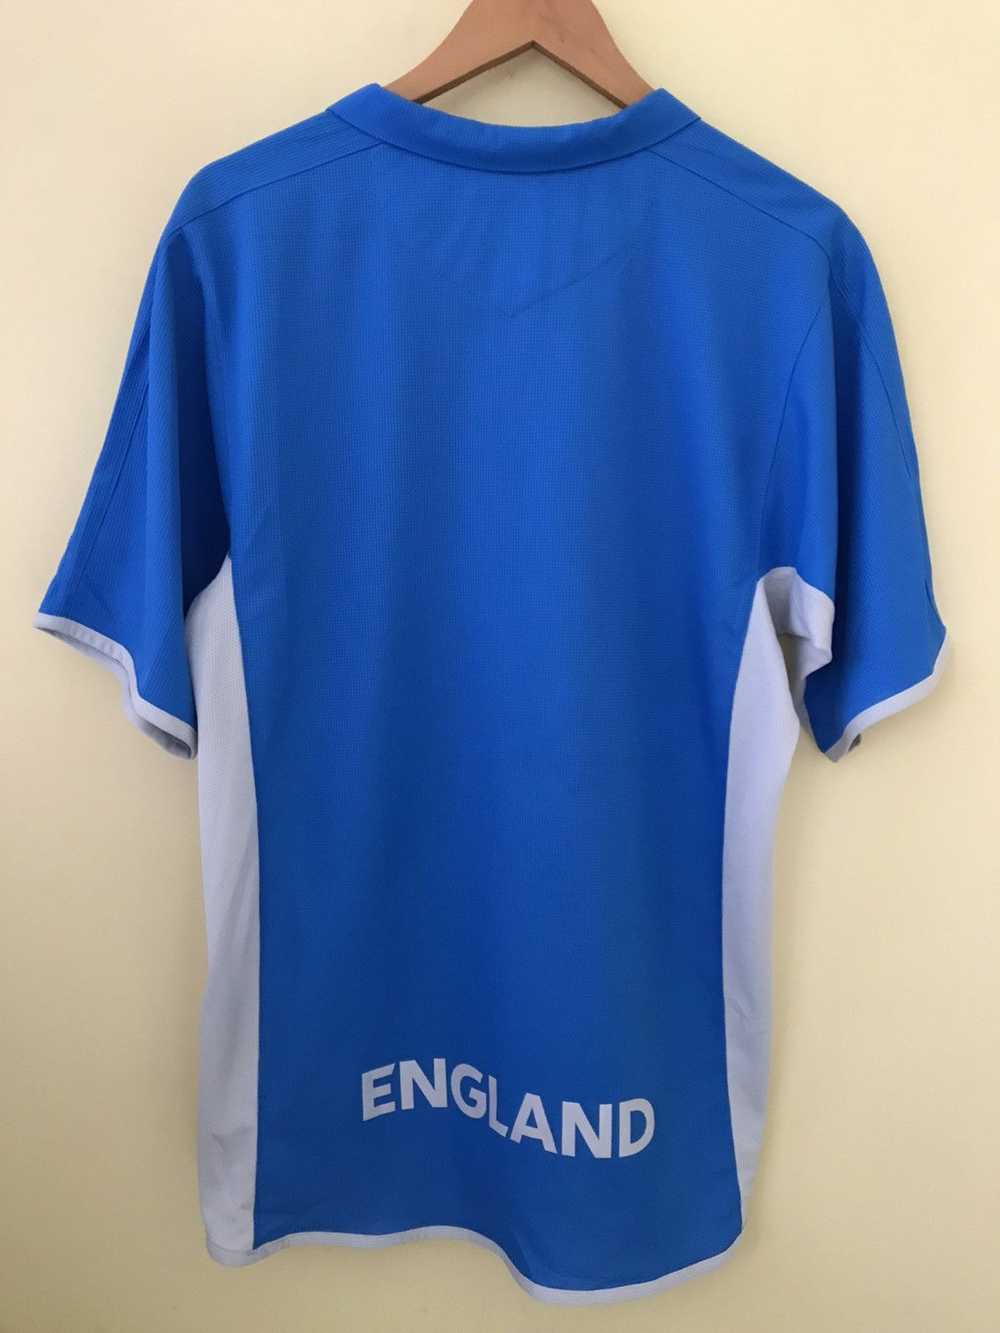 Fifa World Cup × Soccer Jersey × Umbro England 20… - image 2